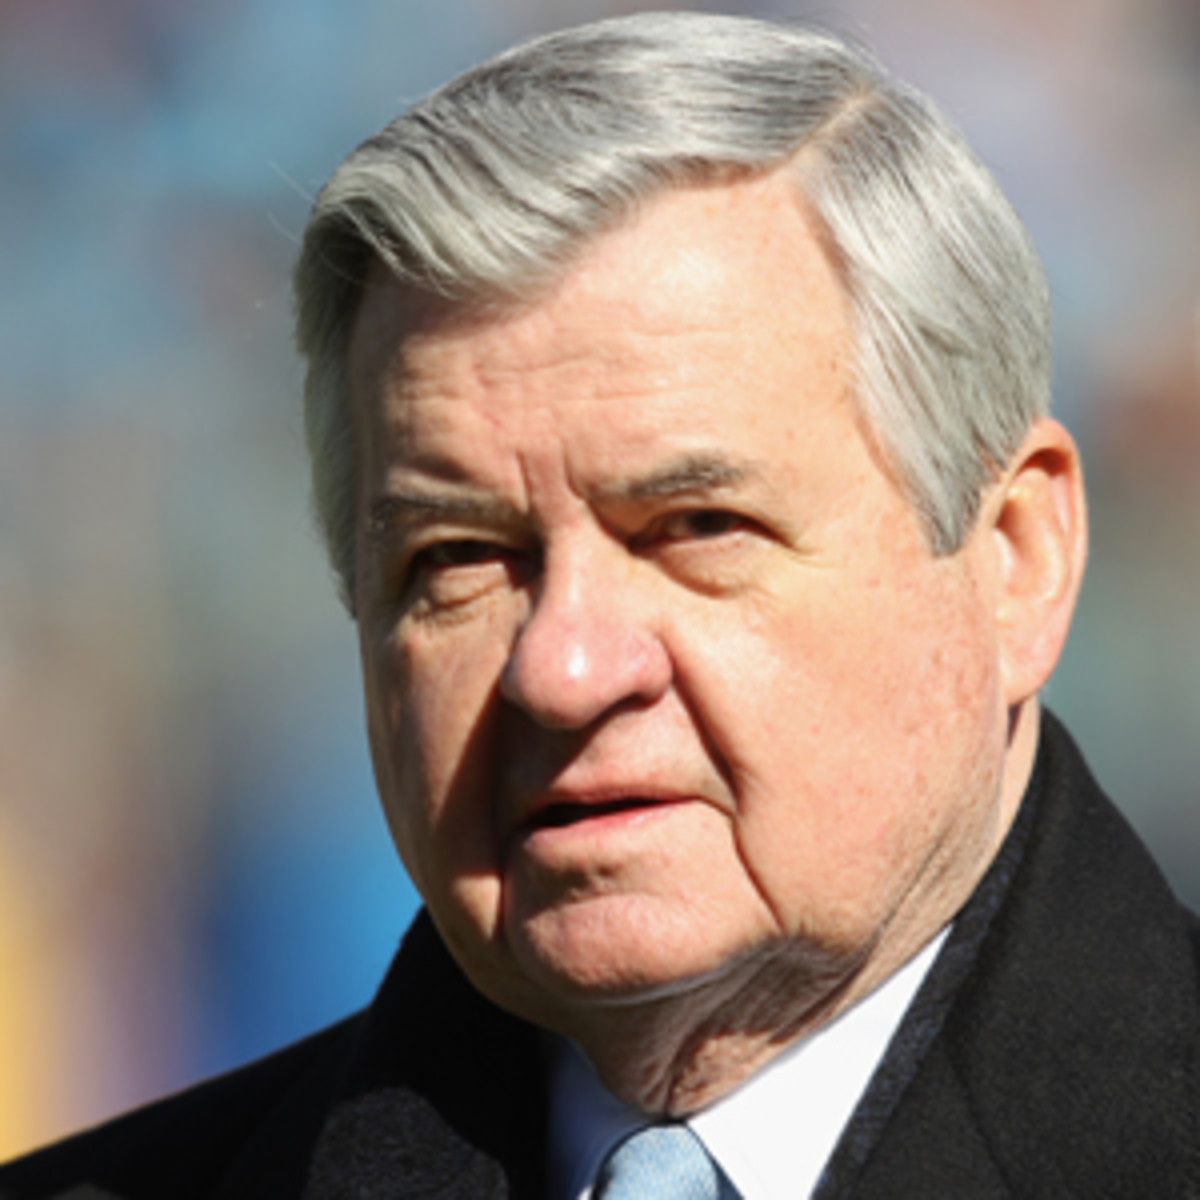 Jerry Richardson was vocal in demanding collective bargaining concessions from NFLPA. (Streeter Lecka/Getty Images)